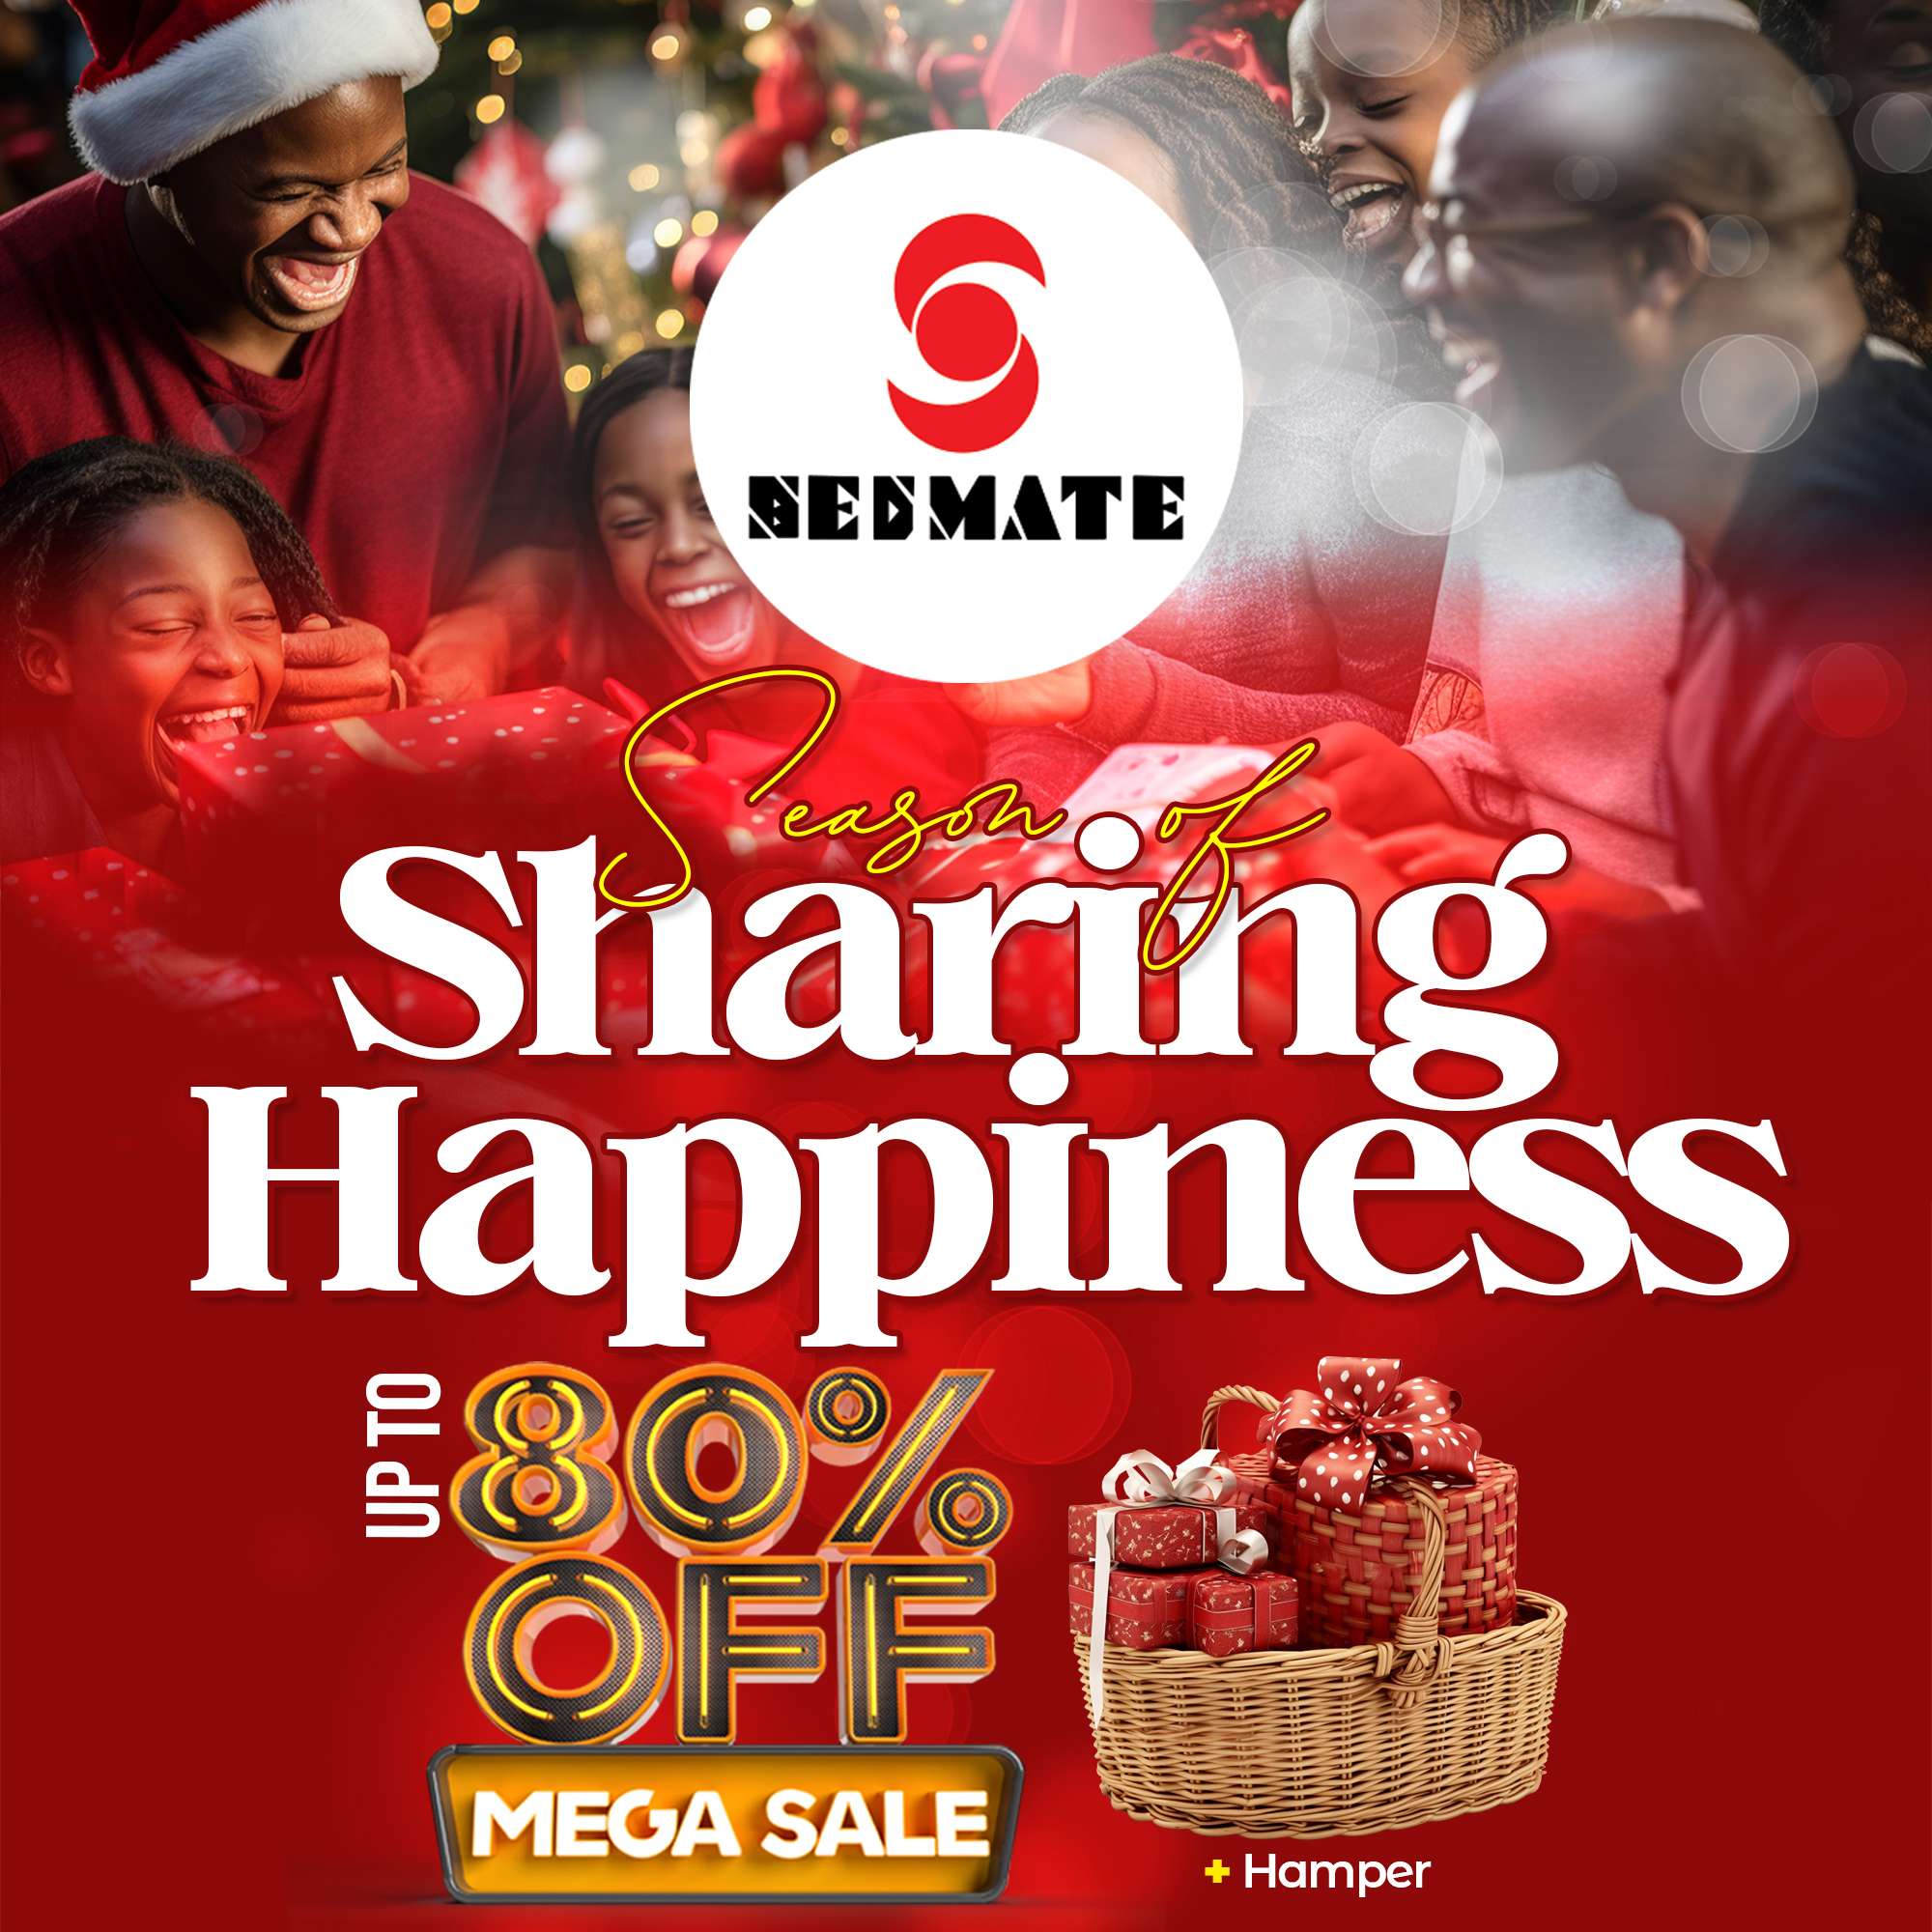 Bedmate Sharing Happiness Promotion